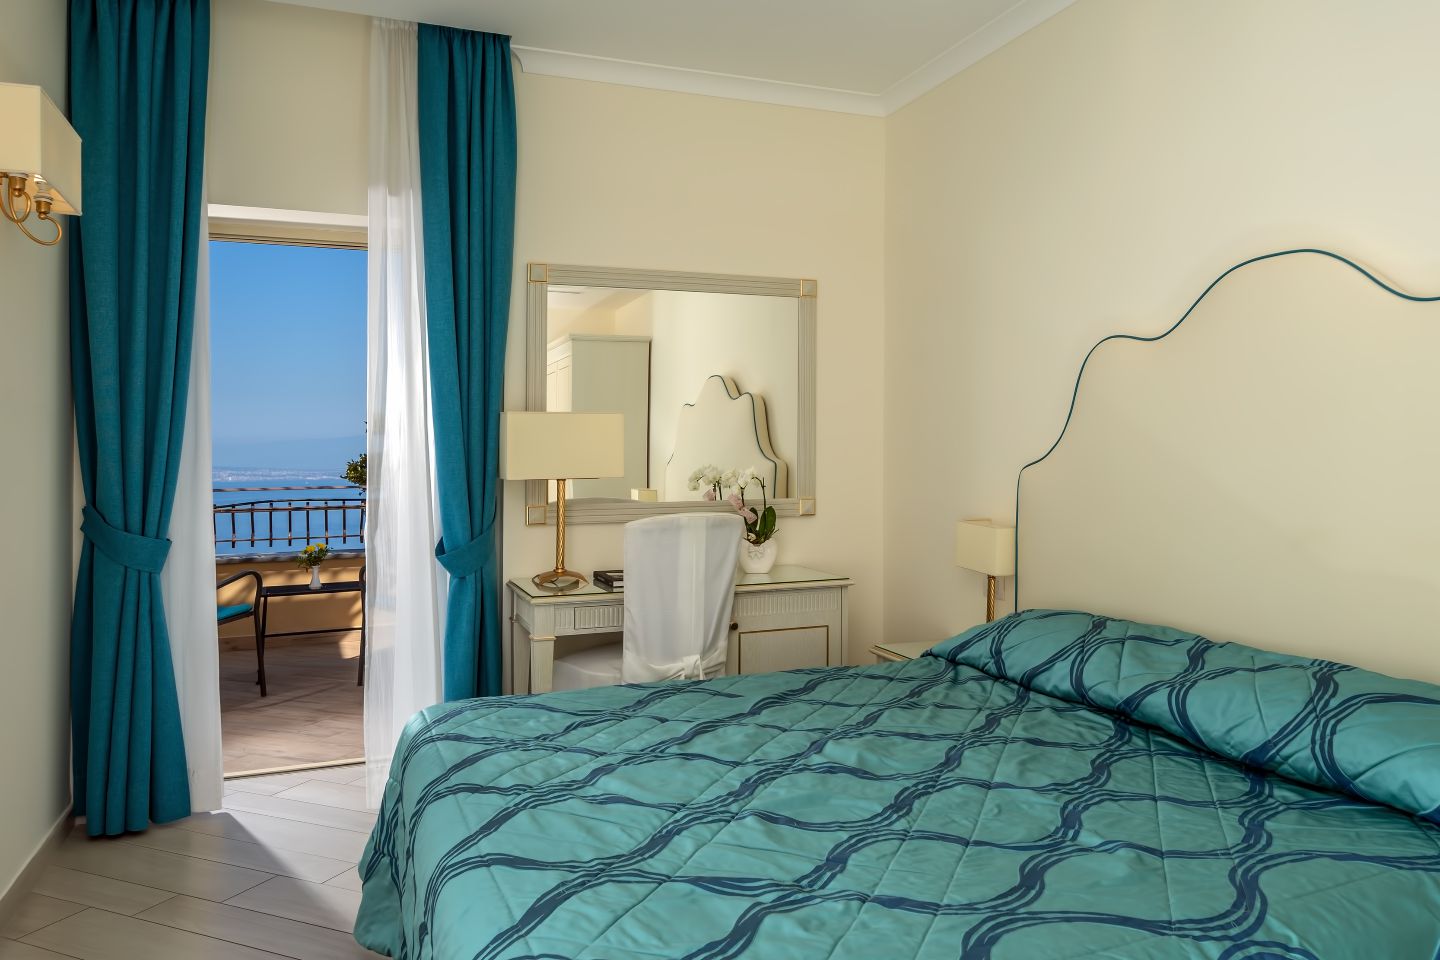  Double room with balcony, sea view - 5